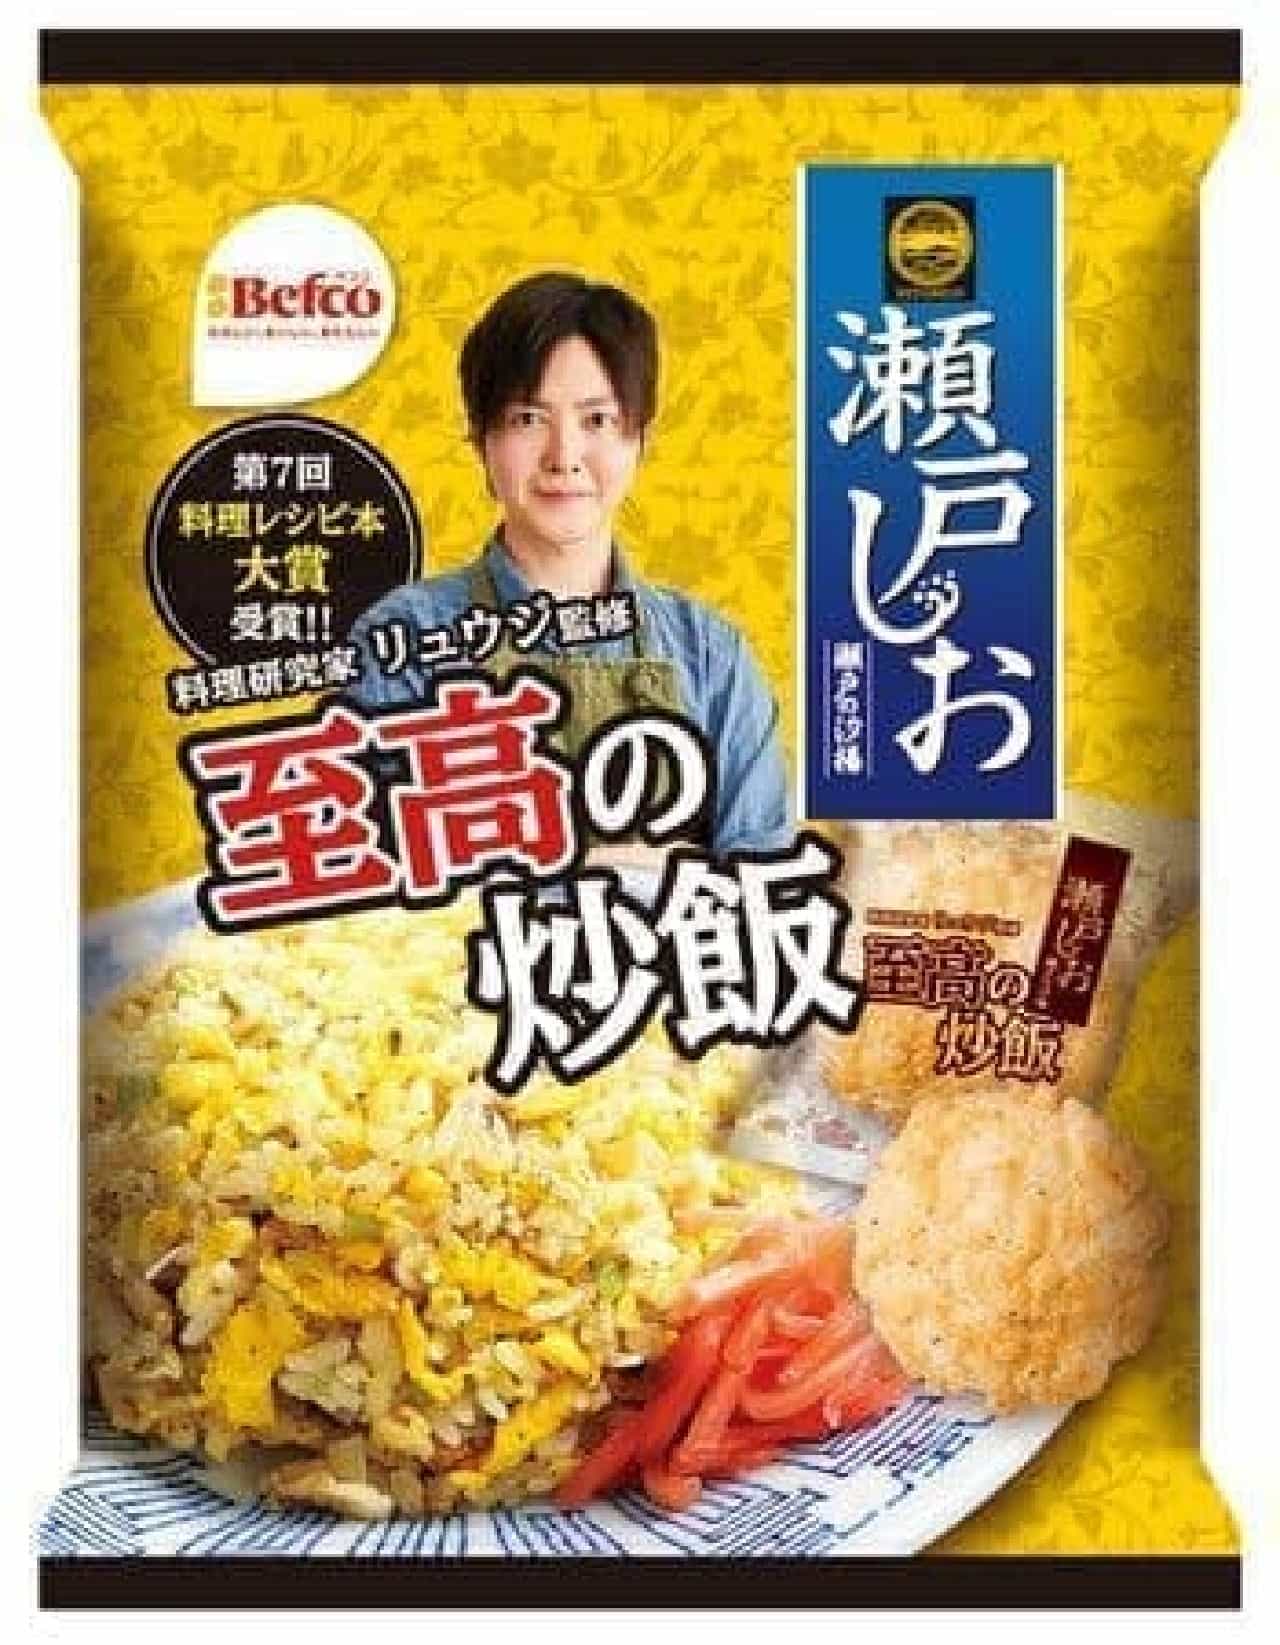 "The Supreme Fried Rice in Seto" supervised by cooking researcher Ryuji